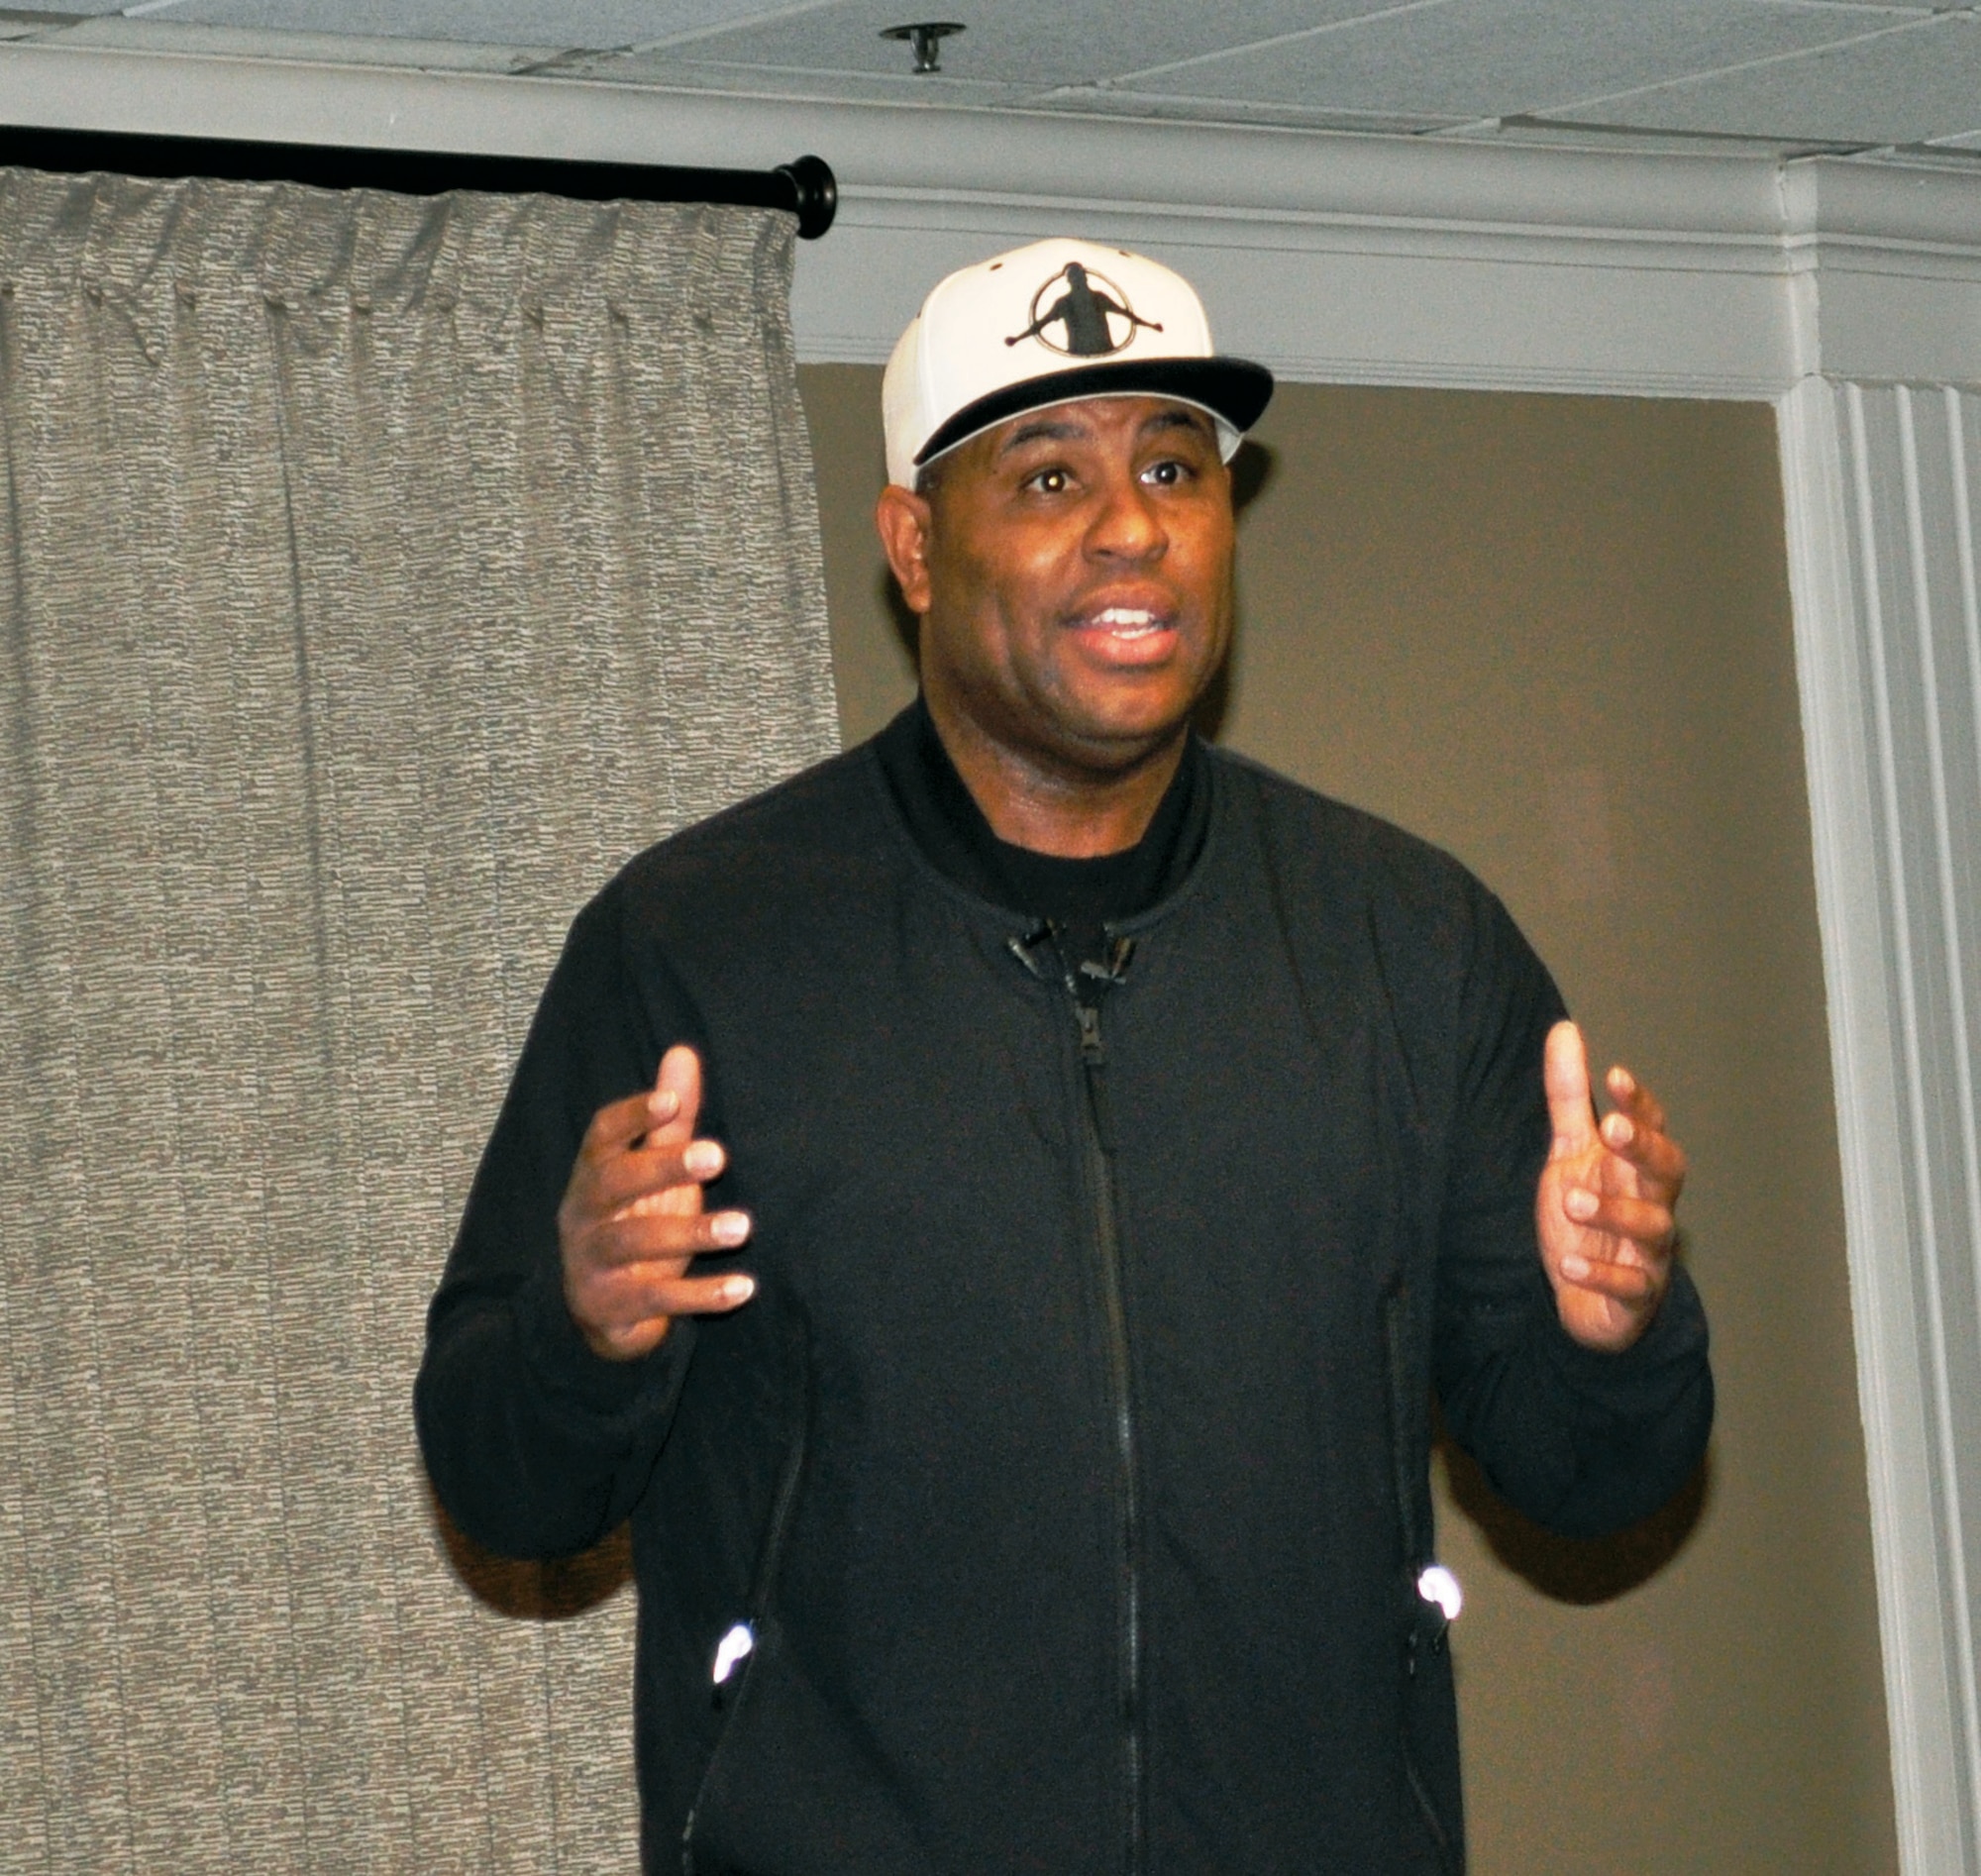 Motivational speaker, Eric Thomas, Ph.D., shared his personal story mixed with inspirational messaging and emphasized to Airmen they should continue to bring excellence to their jobs during his “Take Control: Respect the Process” presentation Dec. 7 at the Tinker Club on Tinker Air Force Base